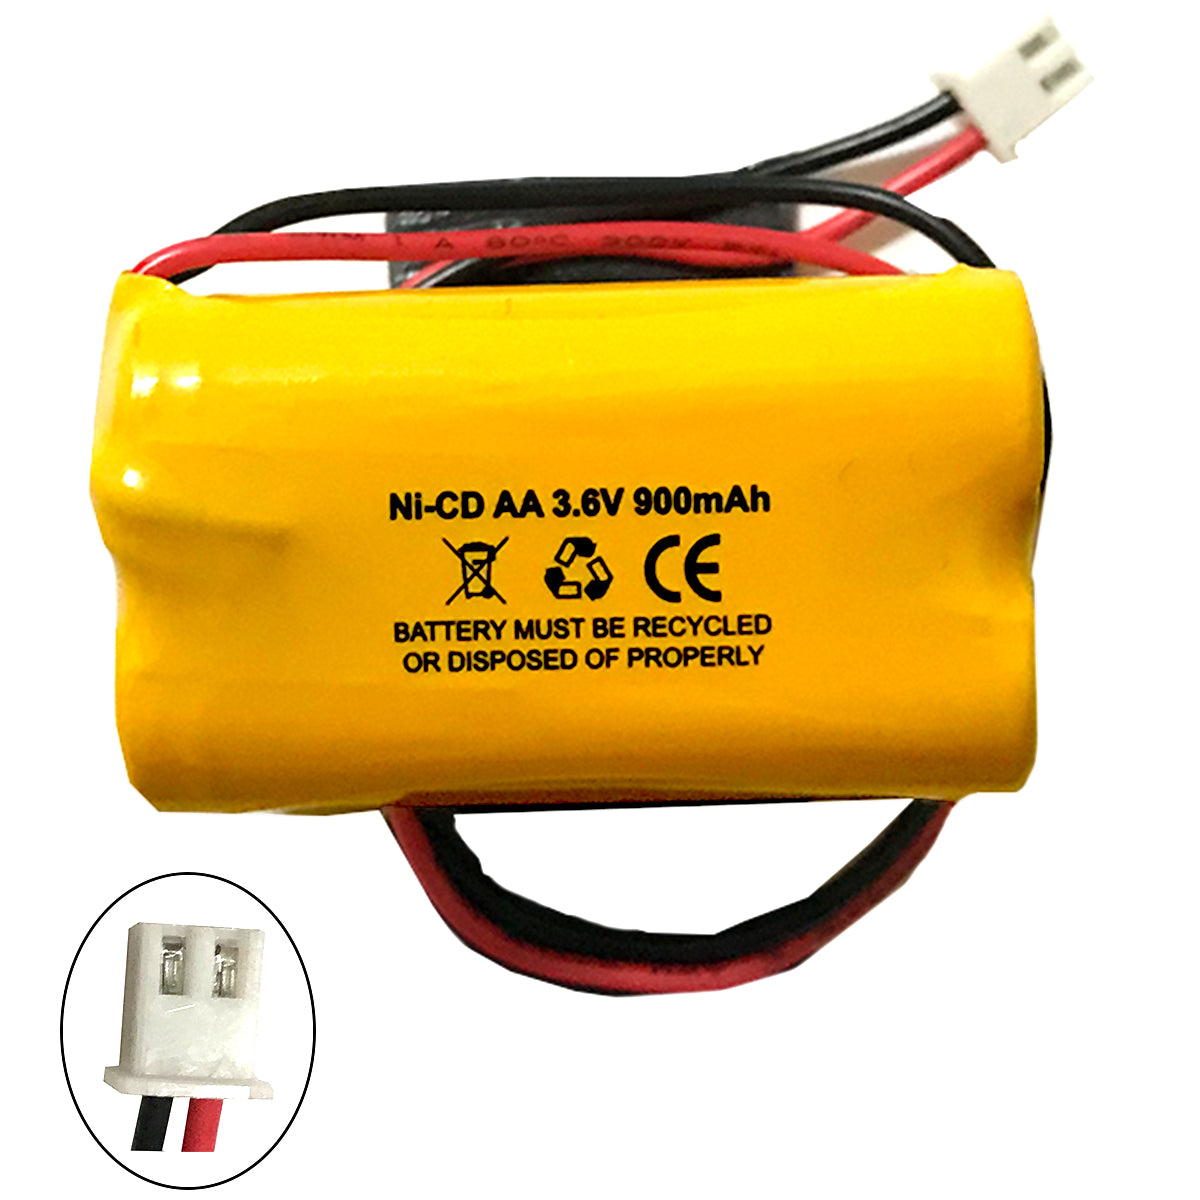 T26000188 3.6V-AA-900mAh Ni-CD Battery Replacement for Emergency